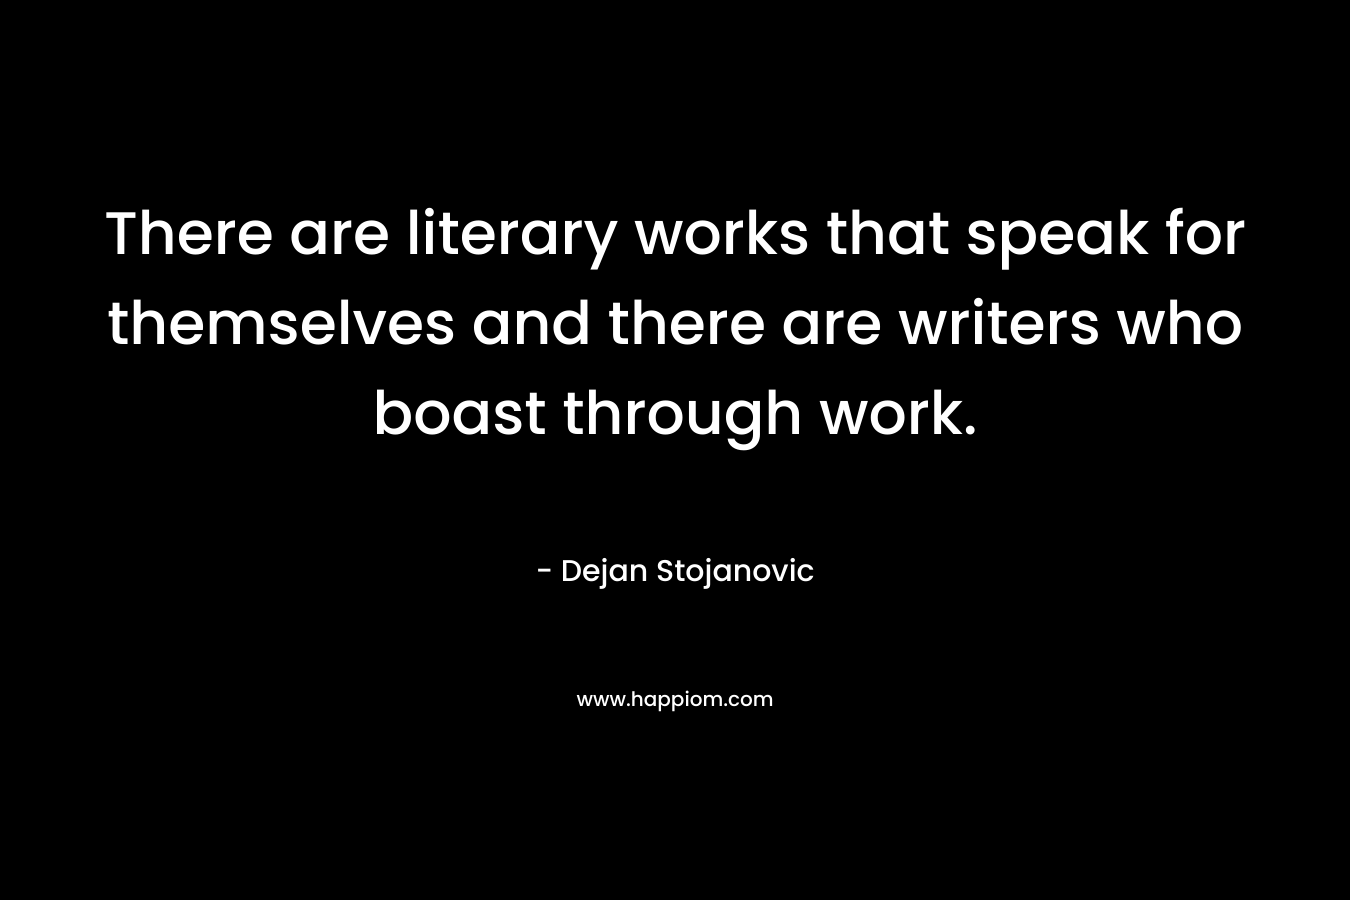 There are literary works that speak for themselves and there are writers who boast through work. – Dejan Stojanovic